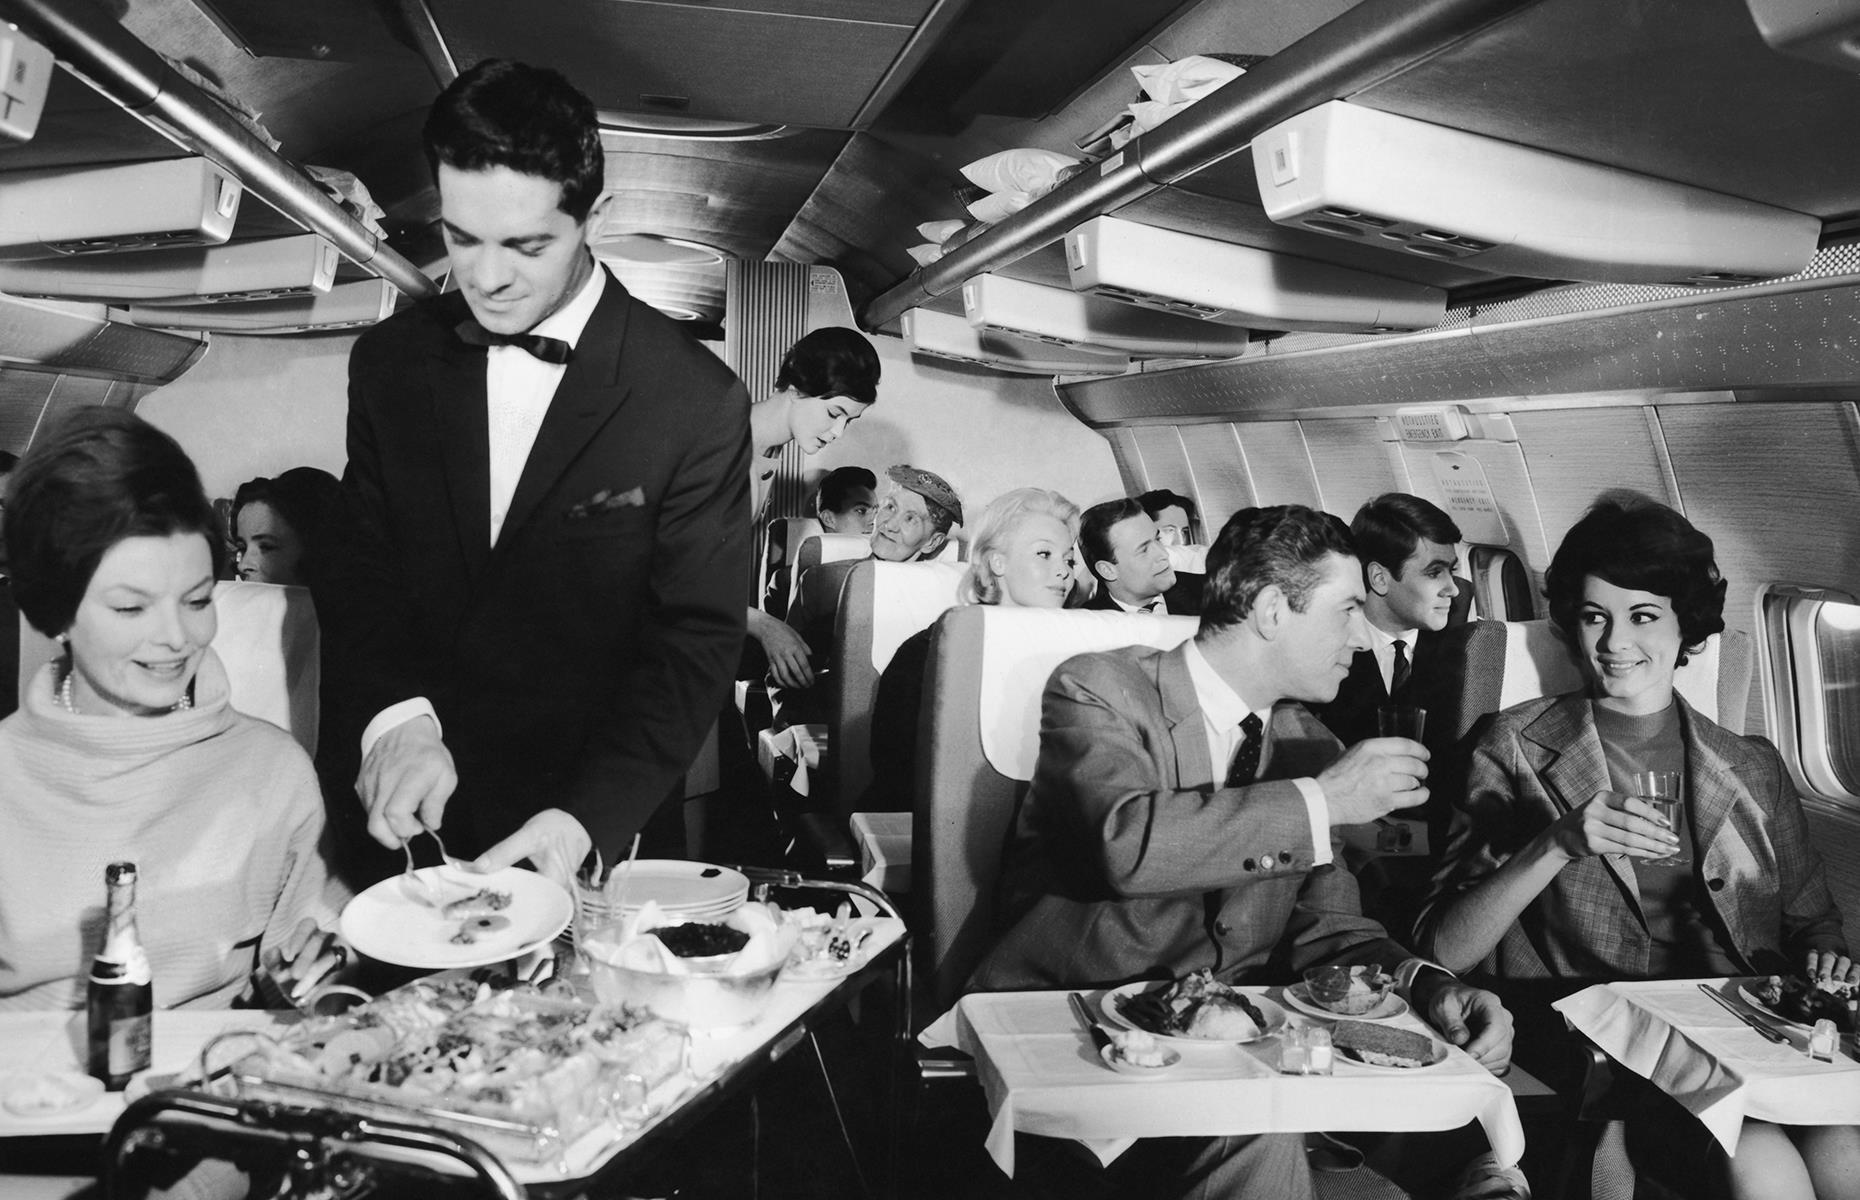 <p>The golden age of travel reigned on through the 1960s and, partly since there wasn't much else to do, dinner was a grand affair. Menus often included multiple courses, bread baskets and dishes such as steak or even lobster. In this 1967 snap, passengers are being served food onboard a Lufthansa flight. Now check out <a href="https://www.lovefood.com/gallerylist/70748/the-most-decadent-airline-menus-throughout-history">the most decadent airline menus throughout history</a>.</p>